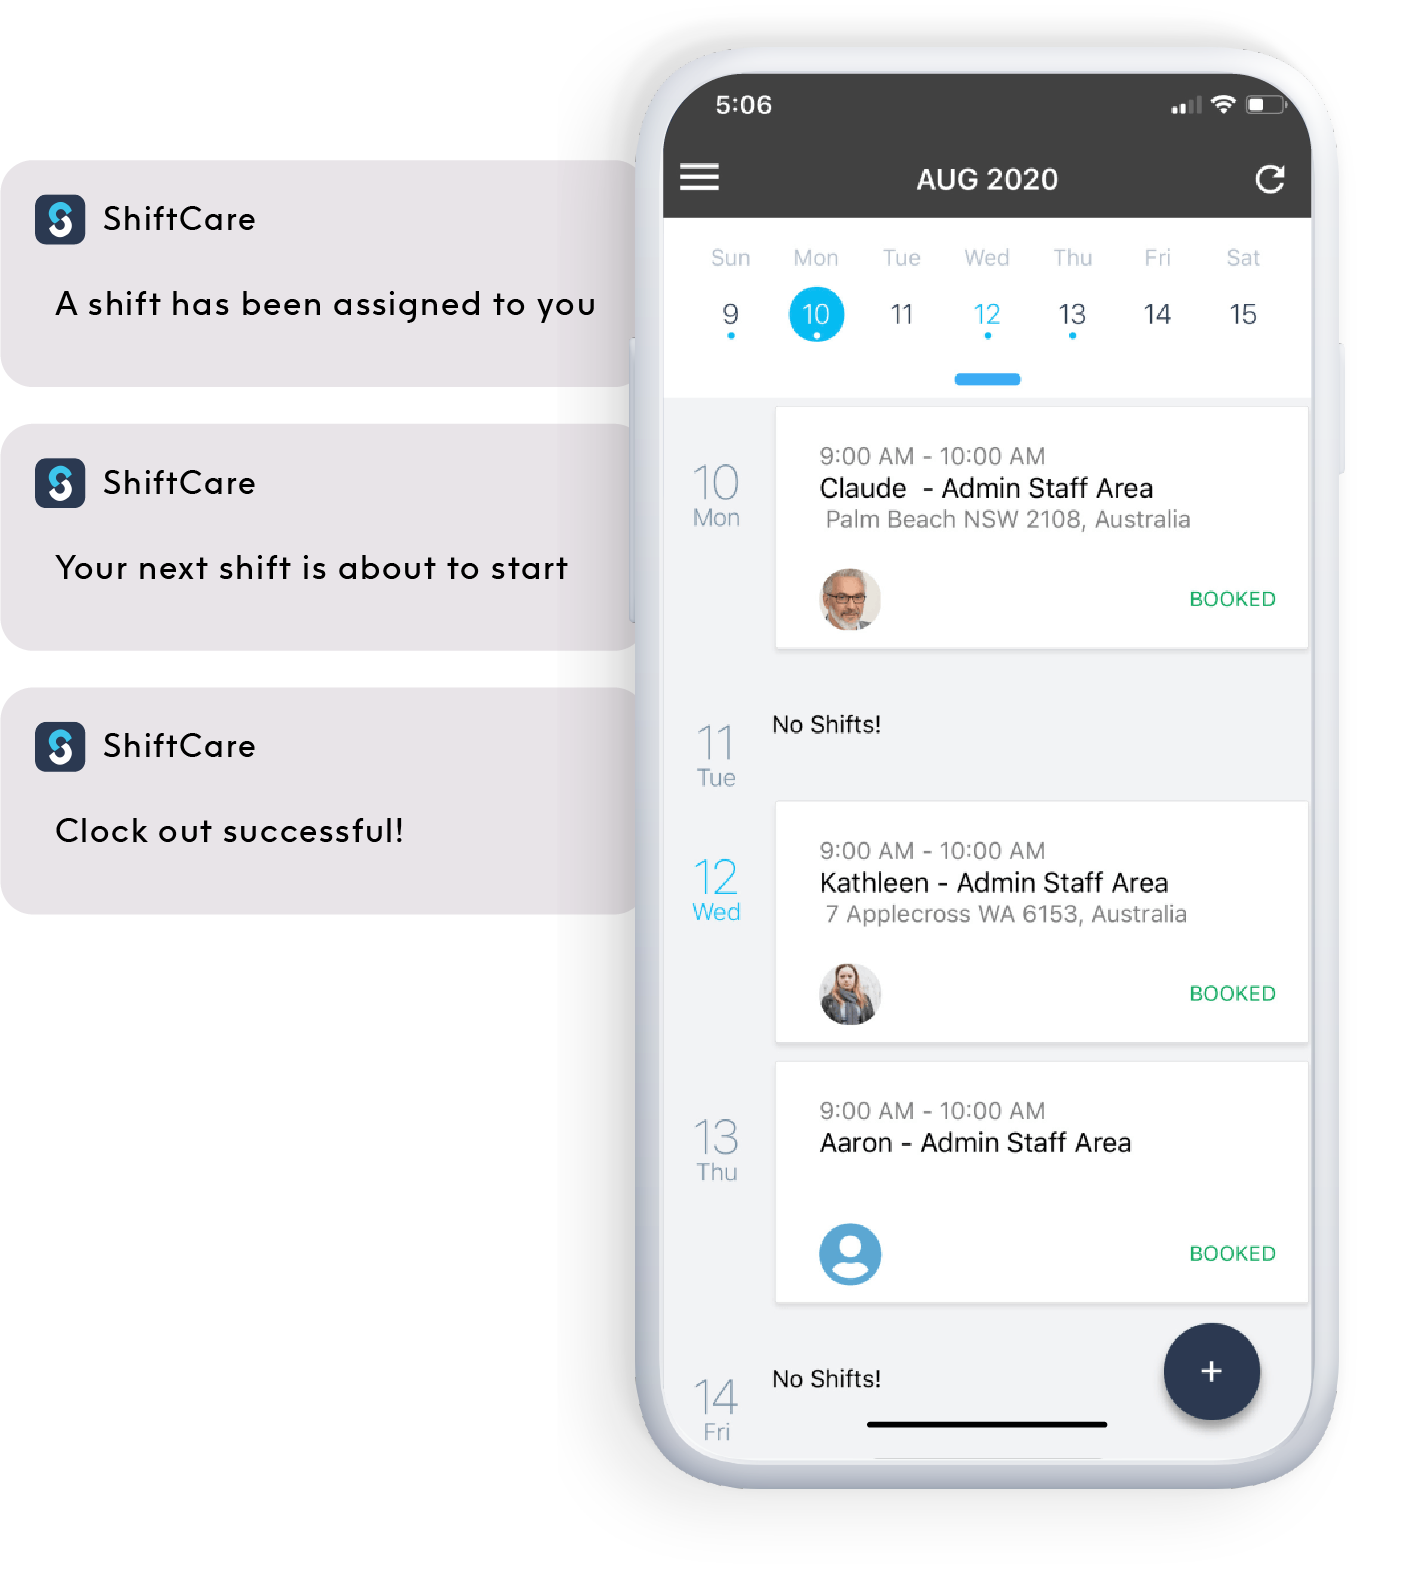 ShiftCare mobile app showing a worker's schedule with notifications for new shifts, upcoming shifts, and successful clock outs